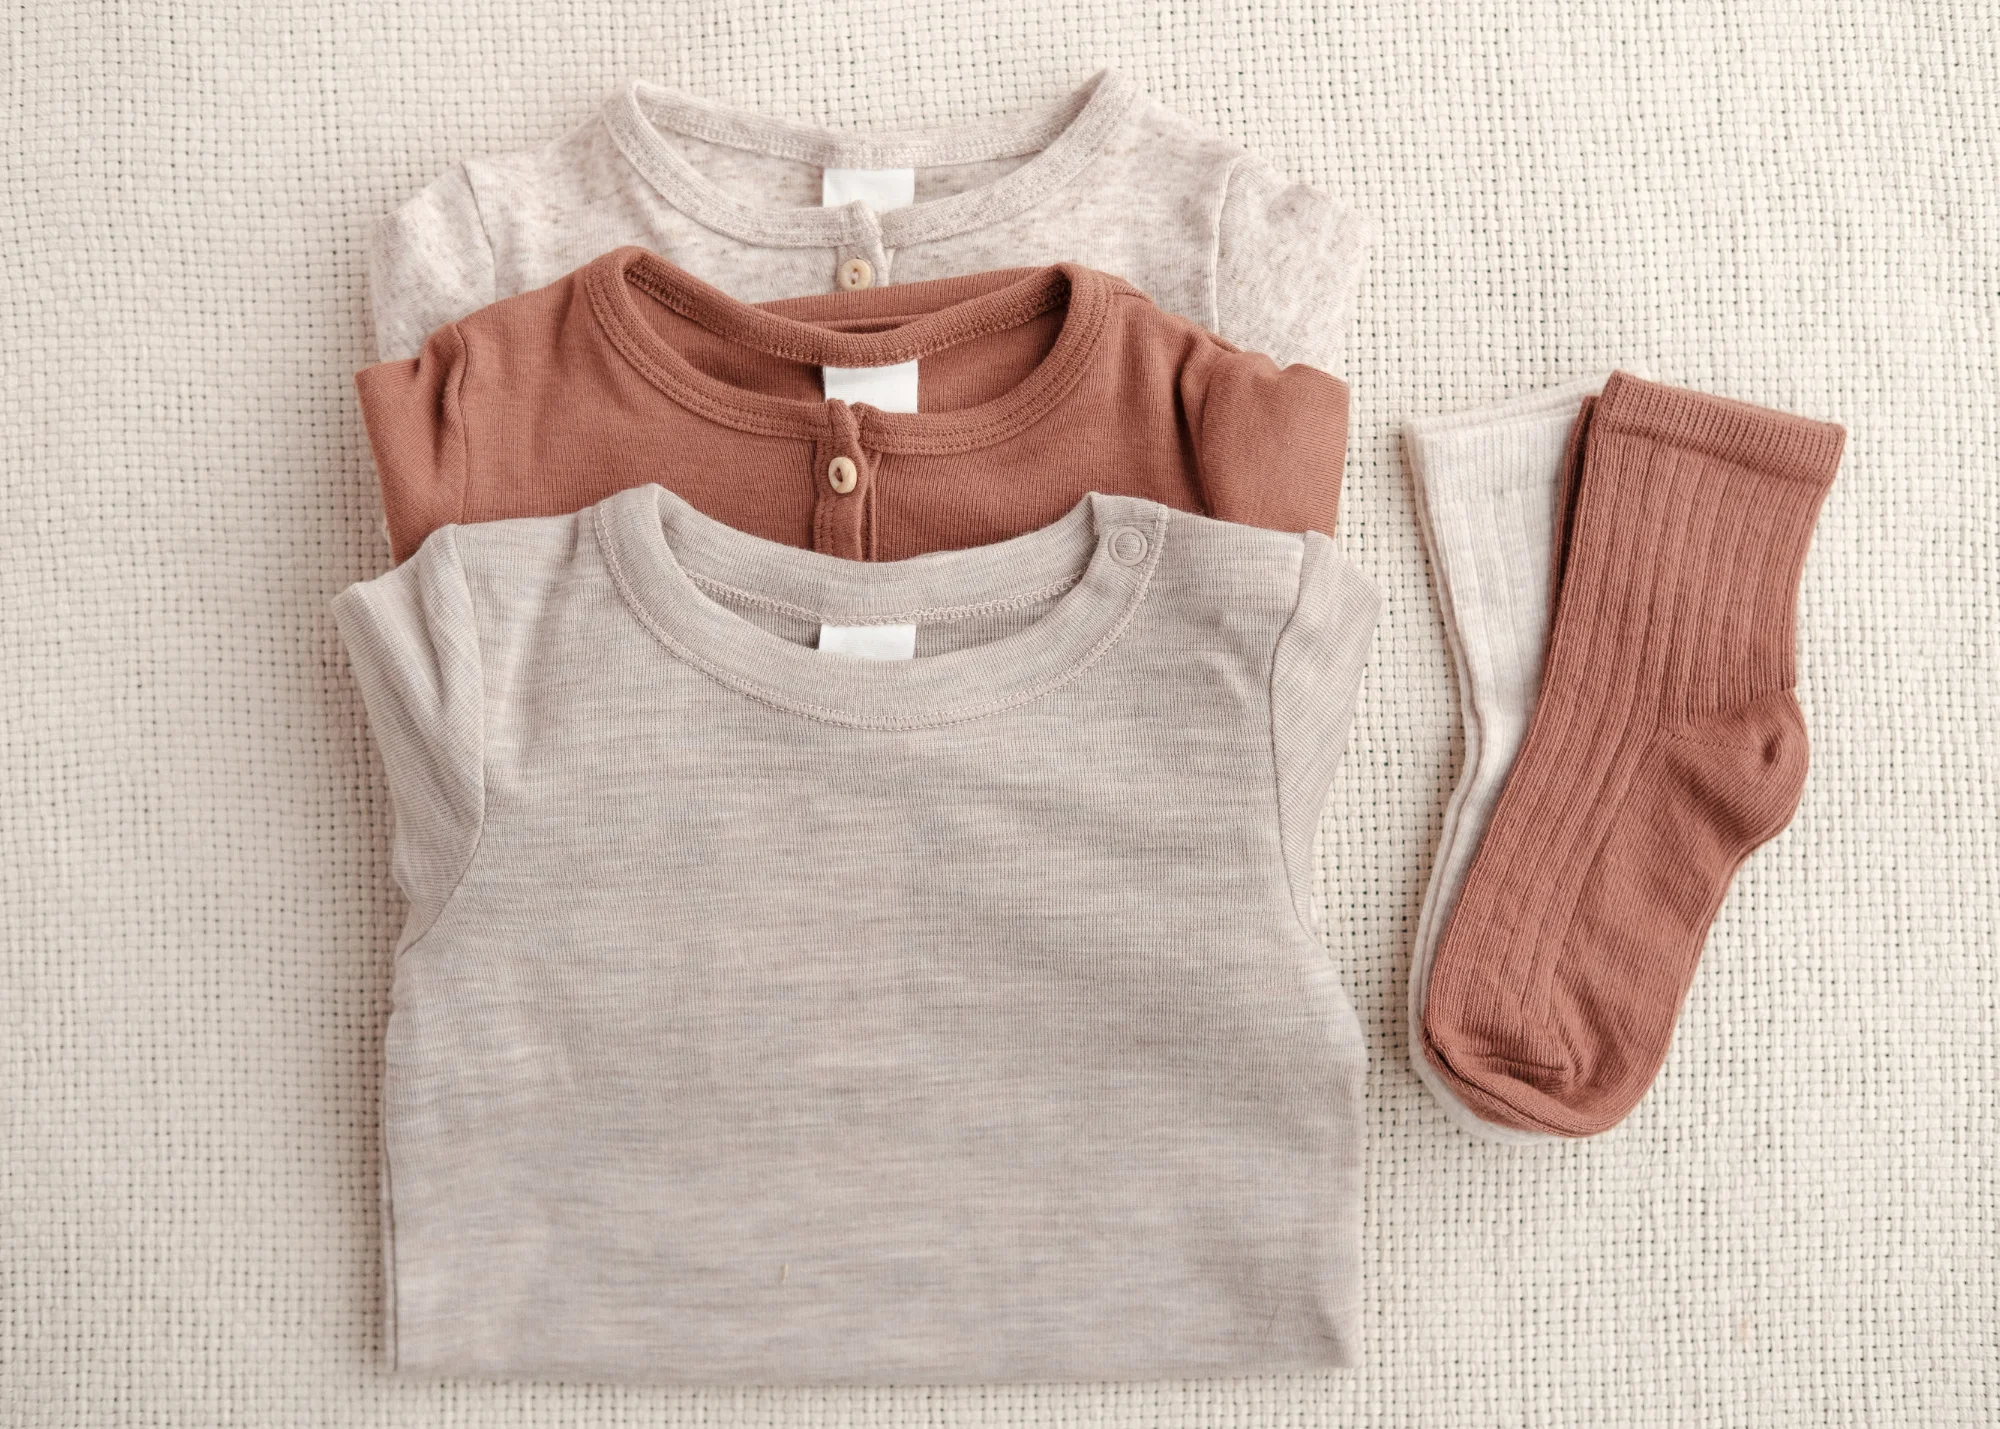 Organic baby clothing comes with utmost comfort